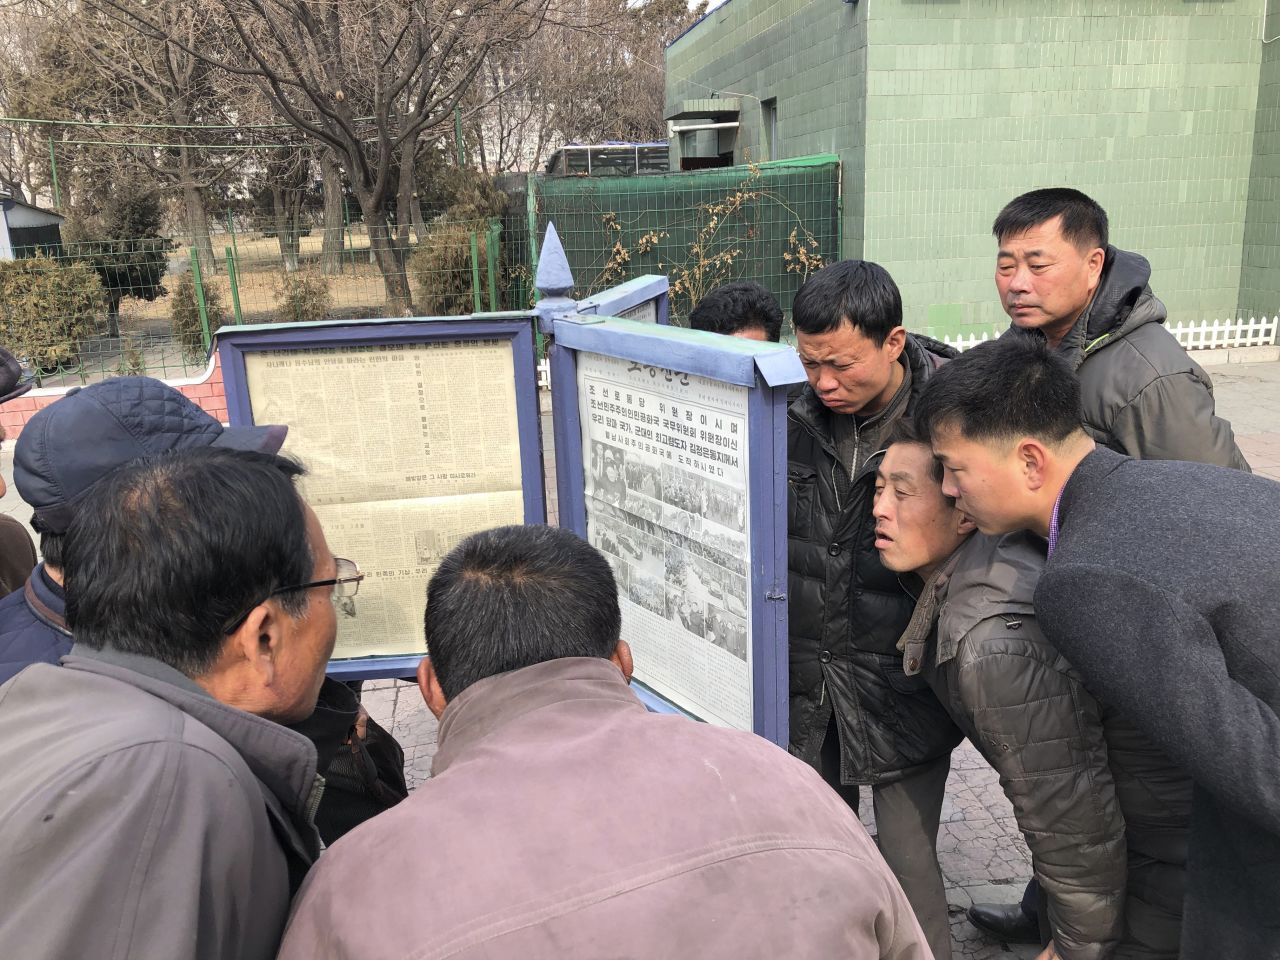 Men in Pyongyang, North Korea, gather around public newspaper posts to read about Kim's visit.